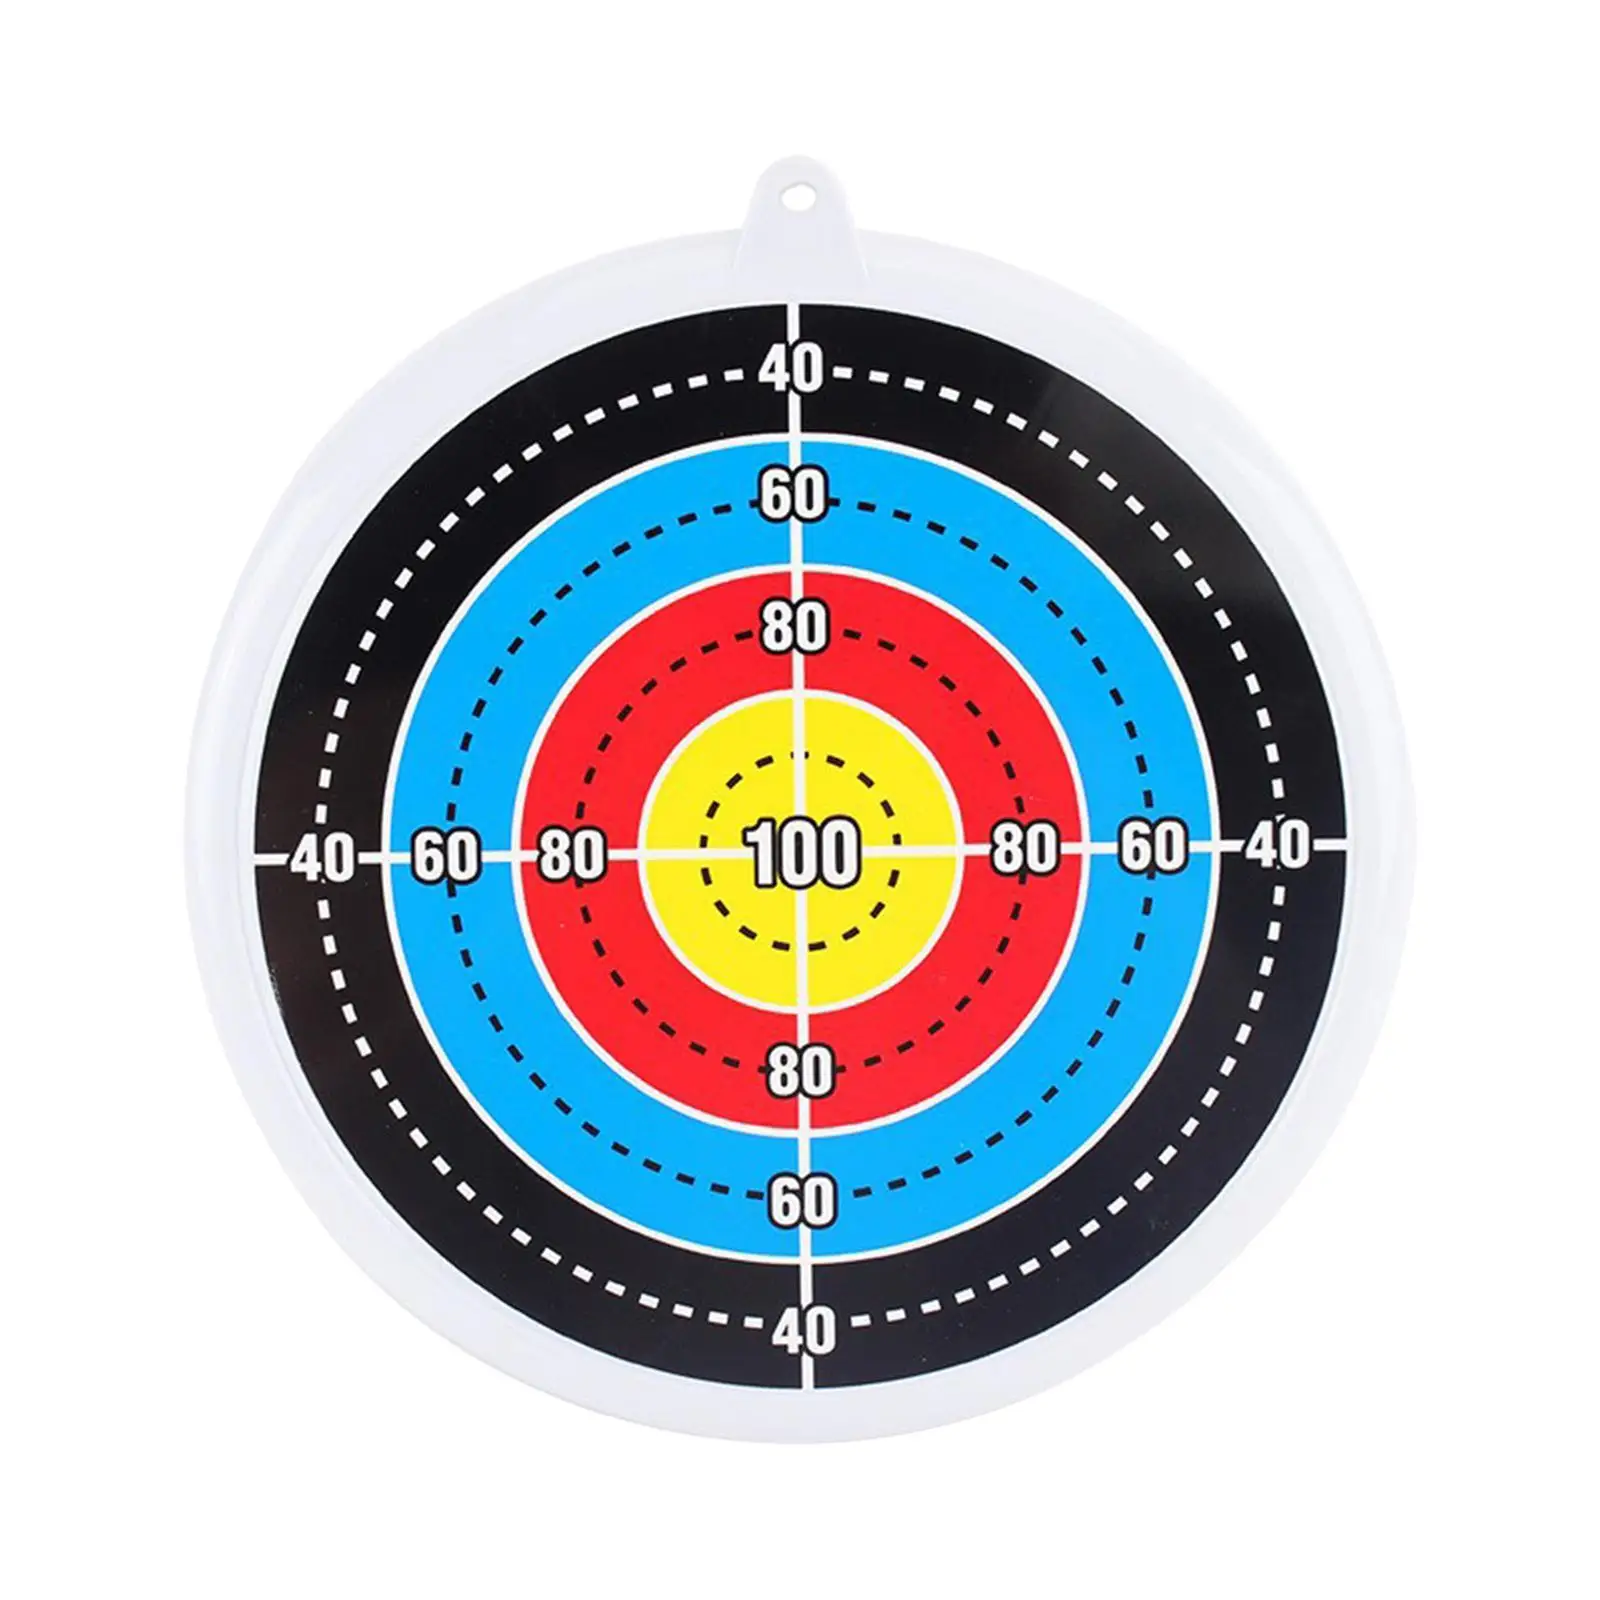 Hanging Target Bow Target Suction Cup Target for Boys Girls Training Playing